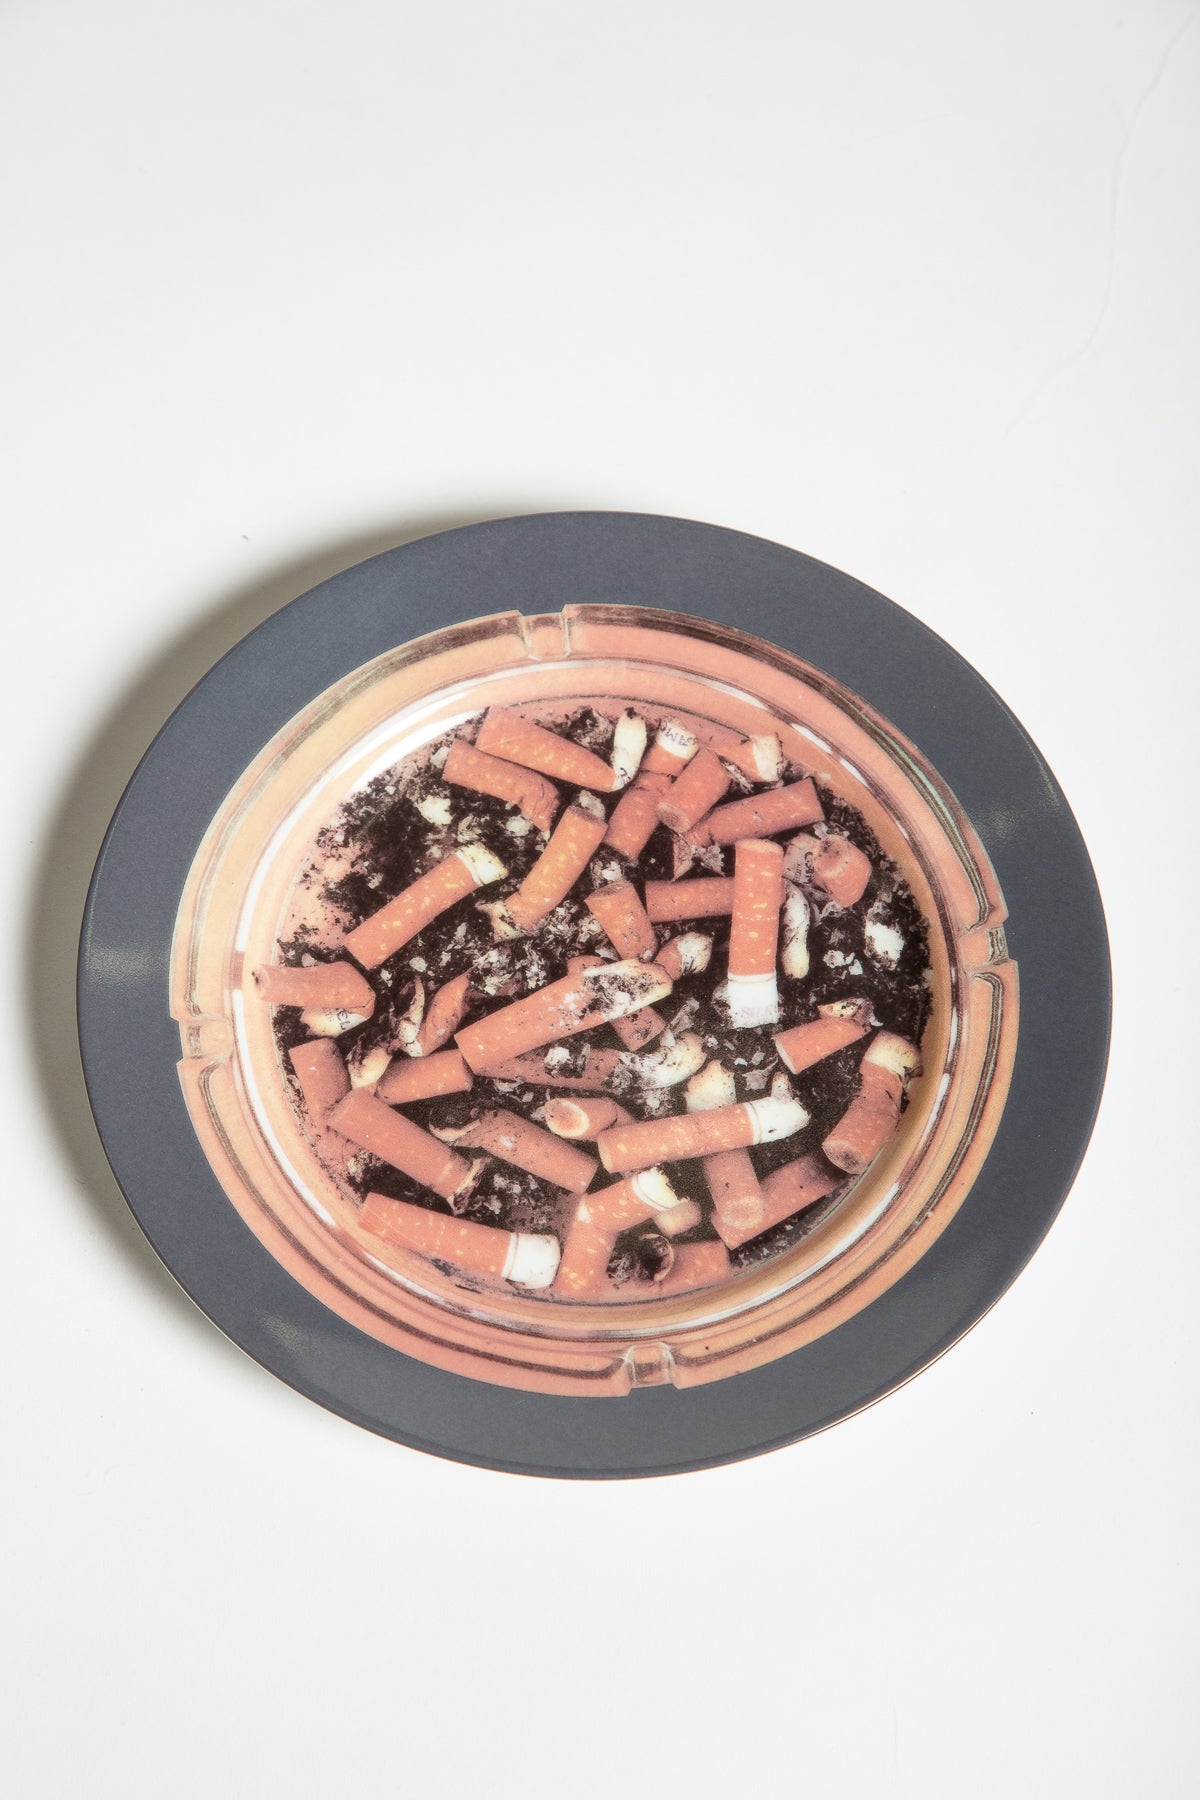 MAXFIELD PRIVATE COLLECTION | 1996 HIRST ASHTRAY PLATE